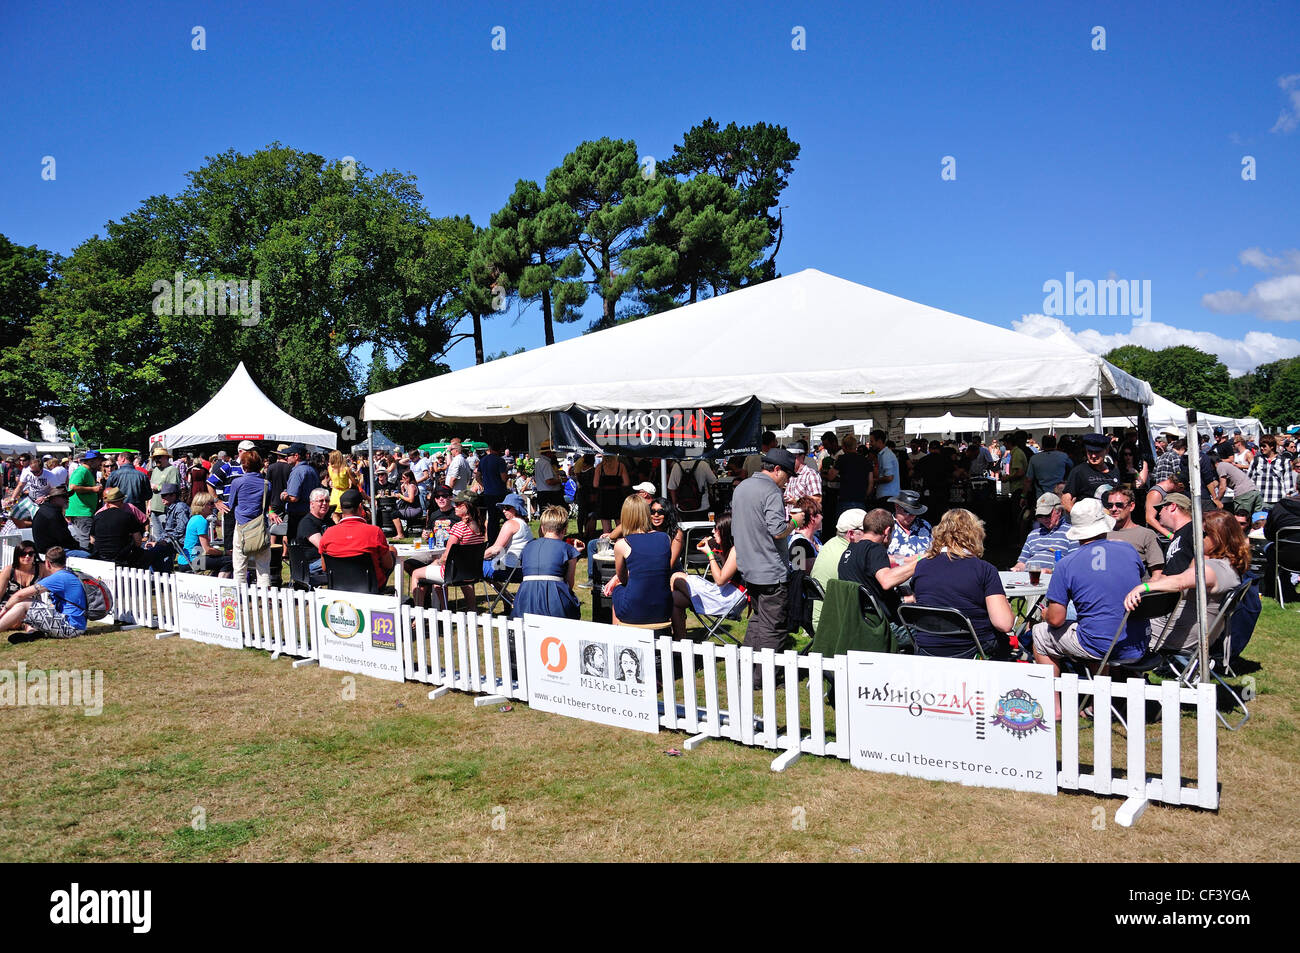 Beer tents at The Great Kiwi Beer Festival, Hagley Park, Christchurch, Canterbury District, New Zealand Stock Photo